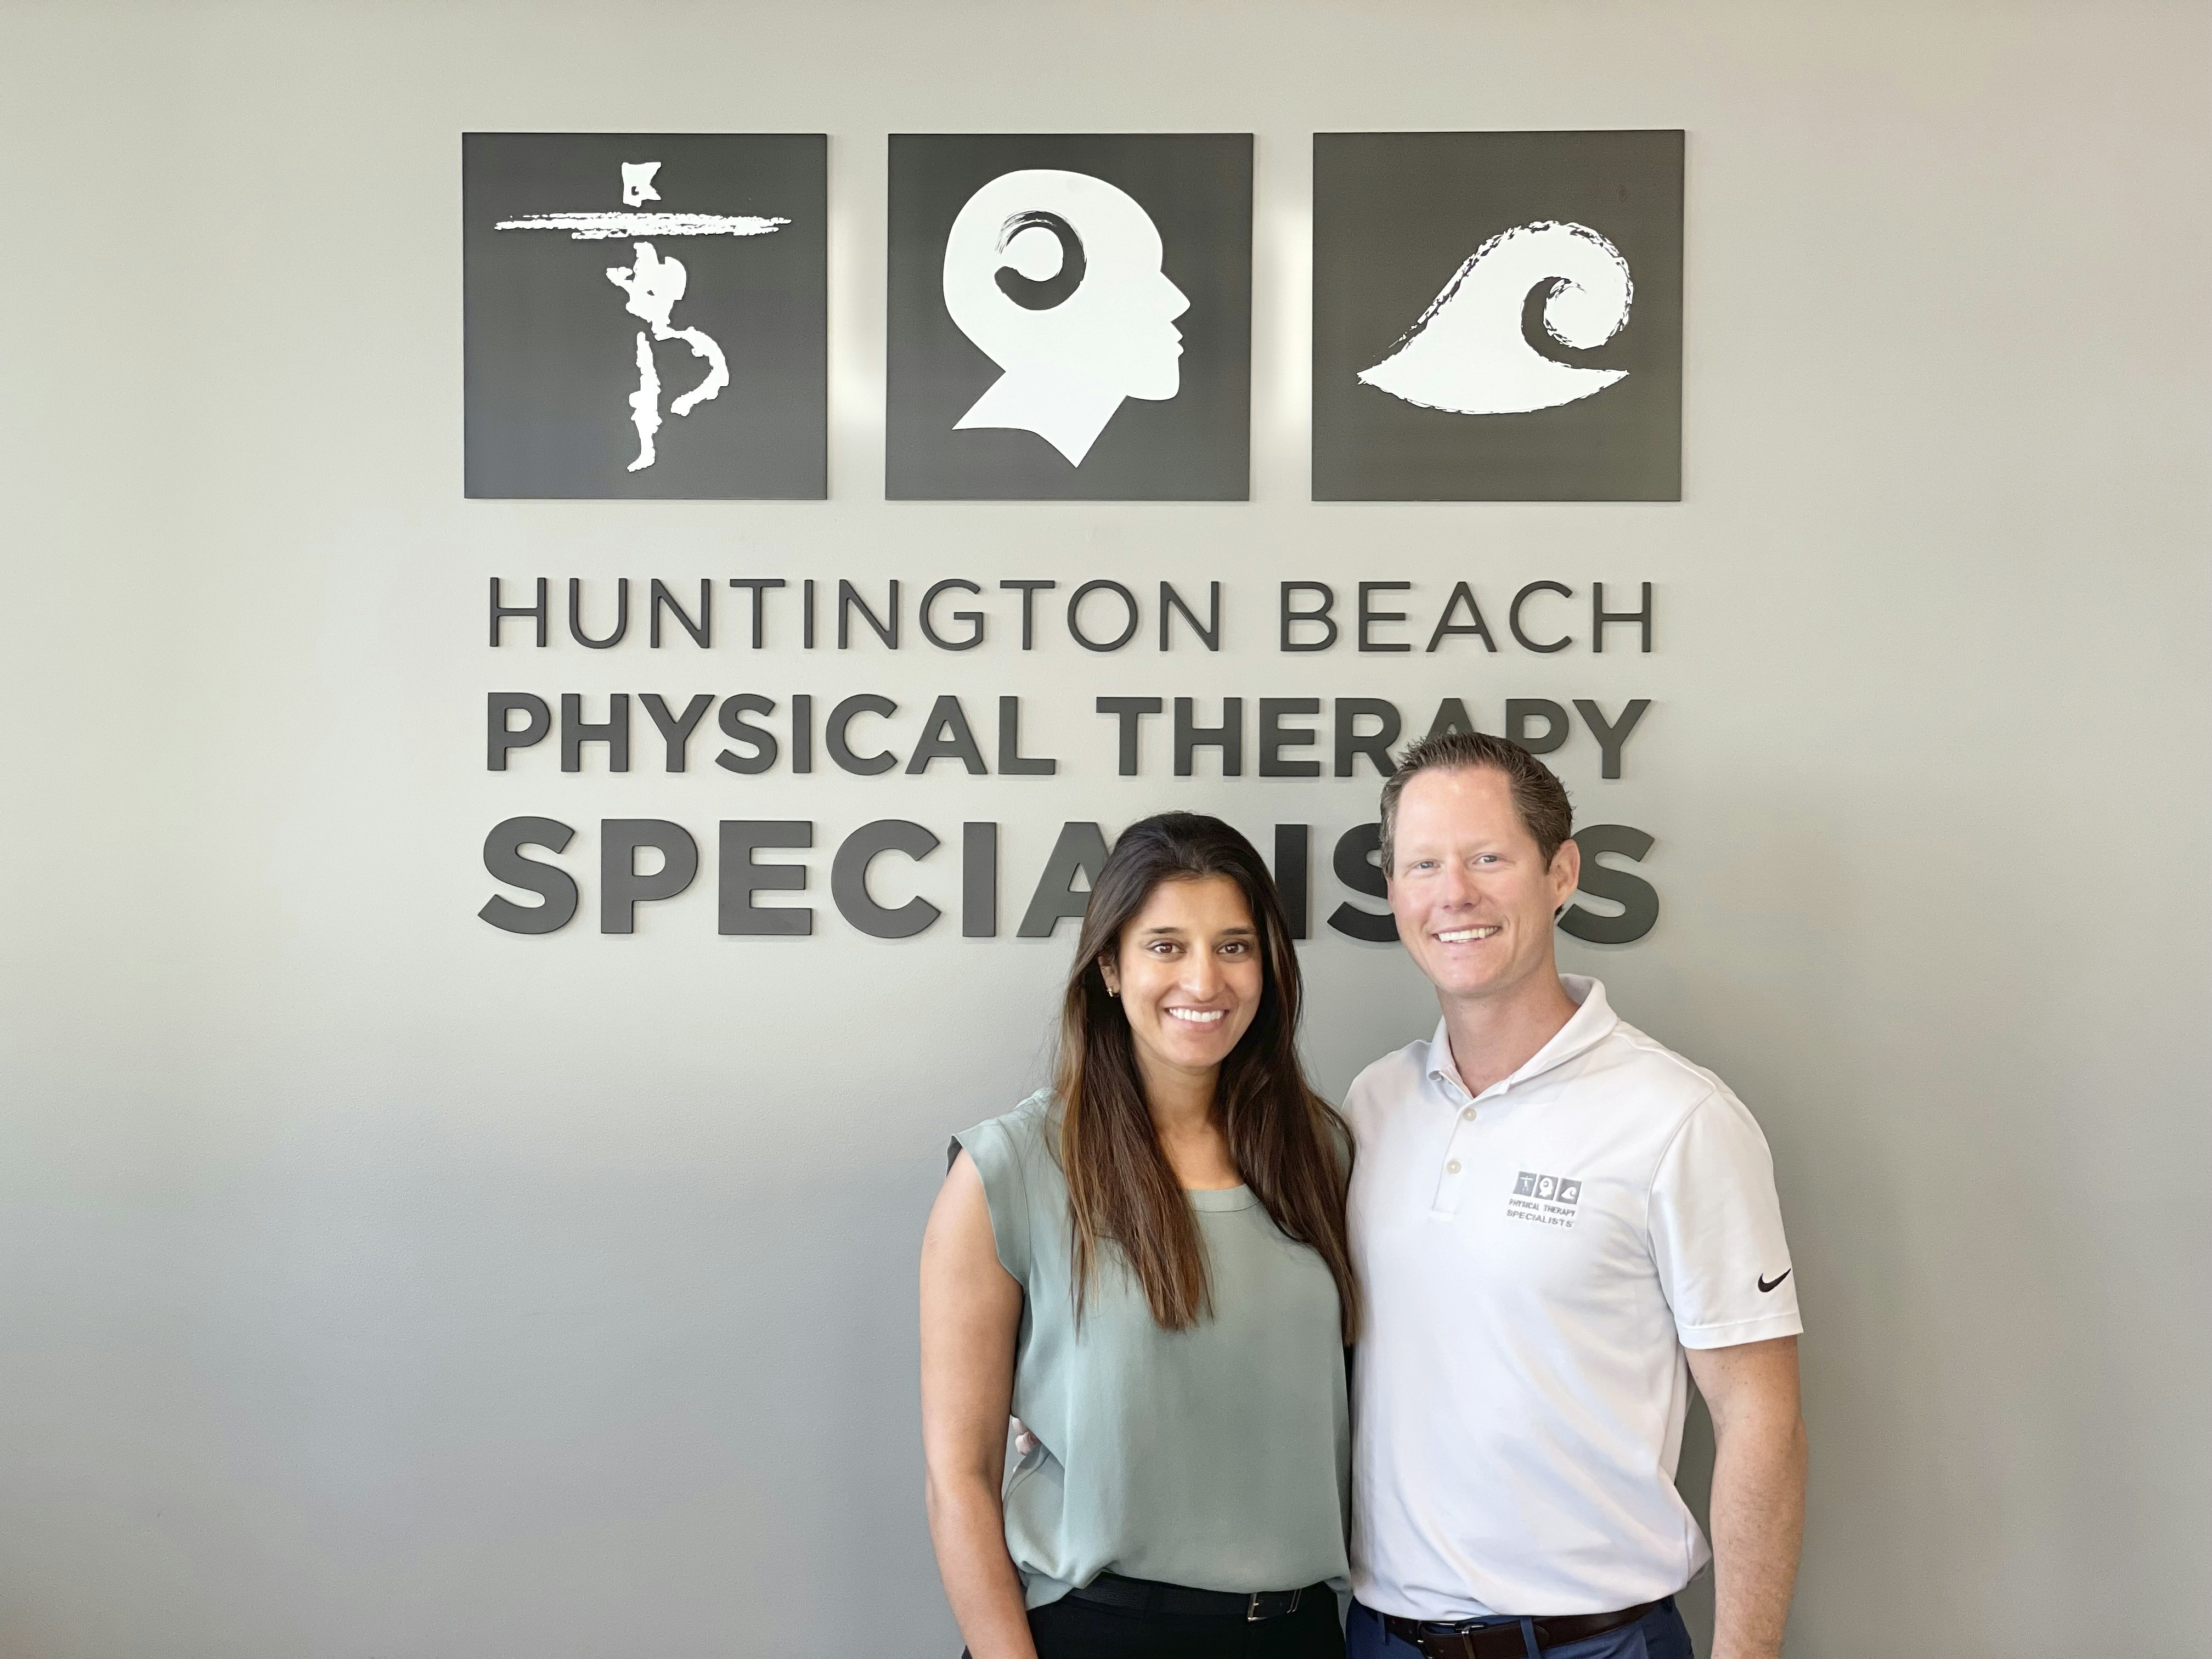 Huntington Beach Physical Therapy Specialists